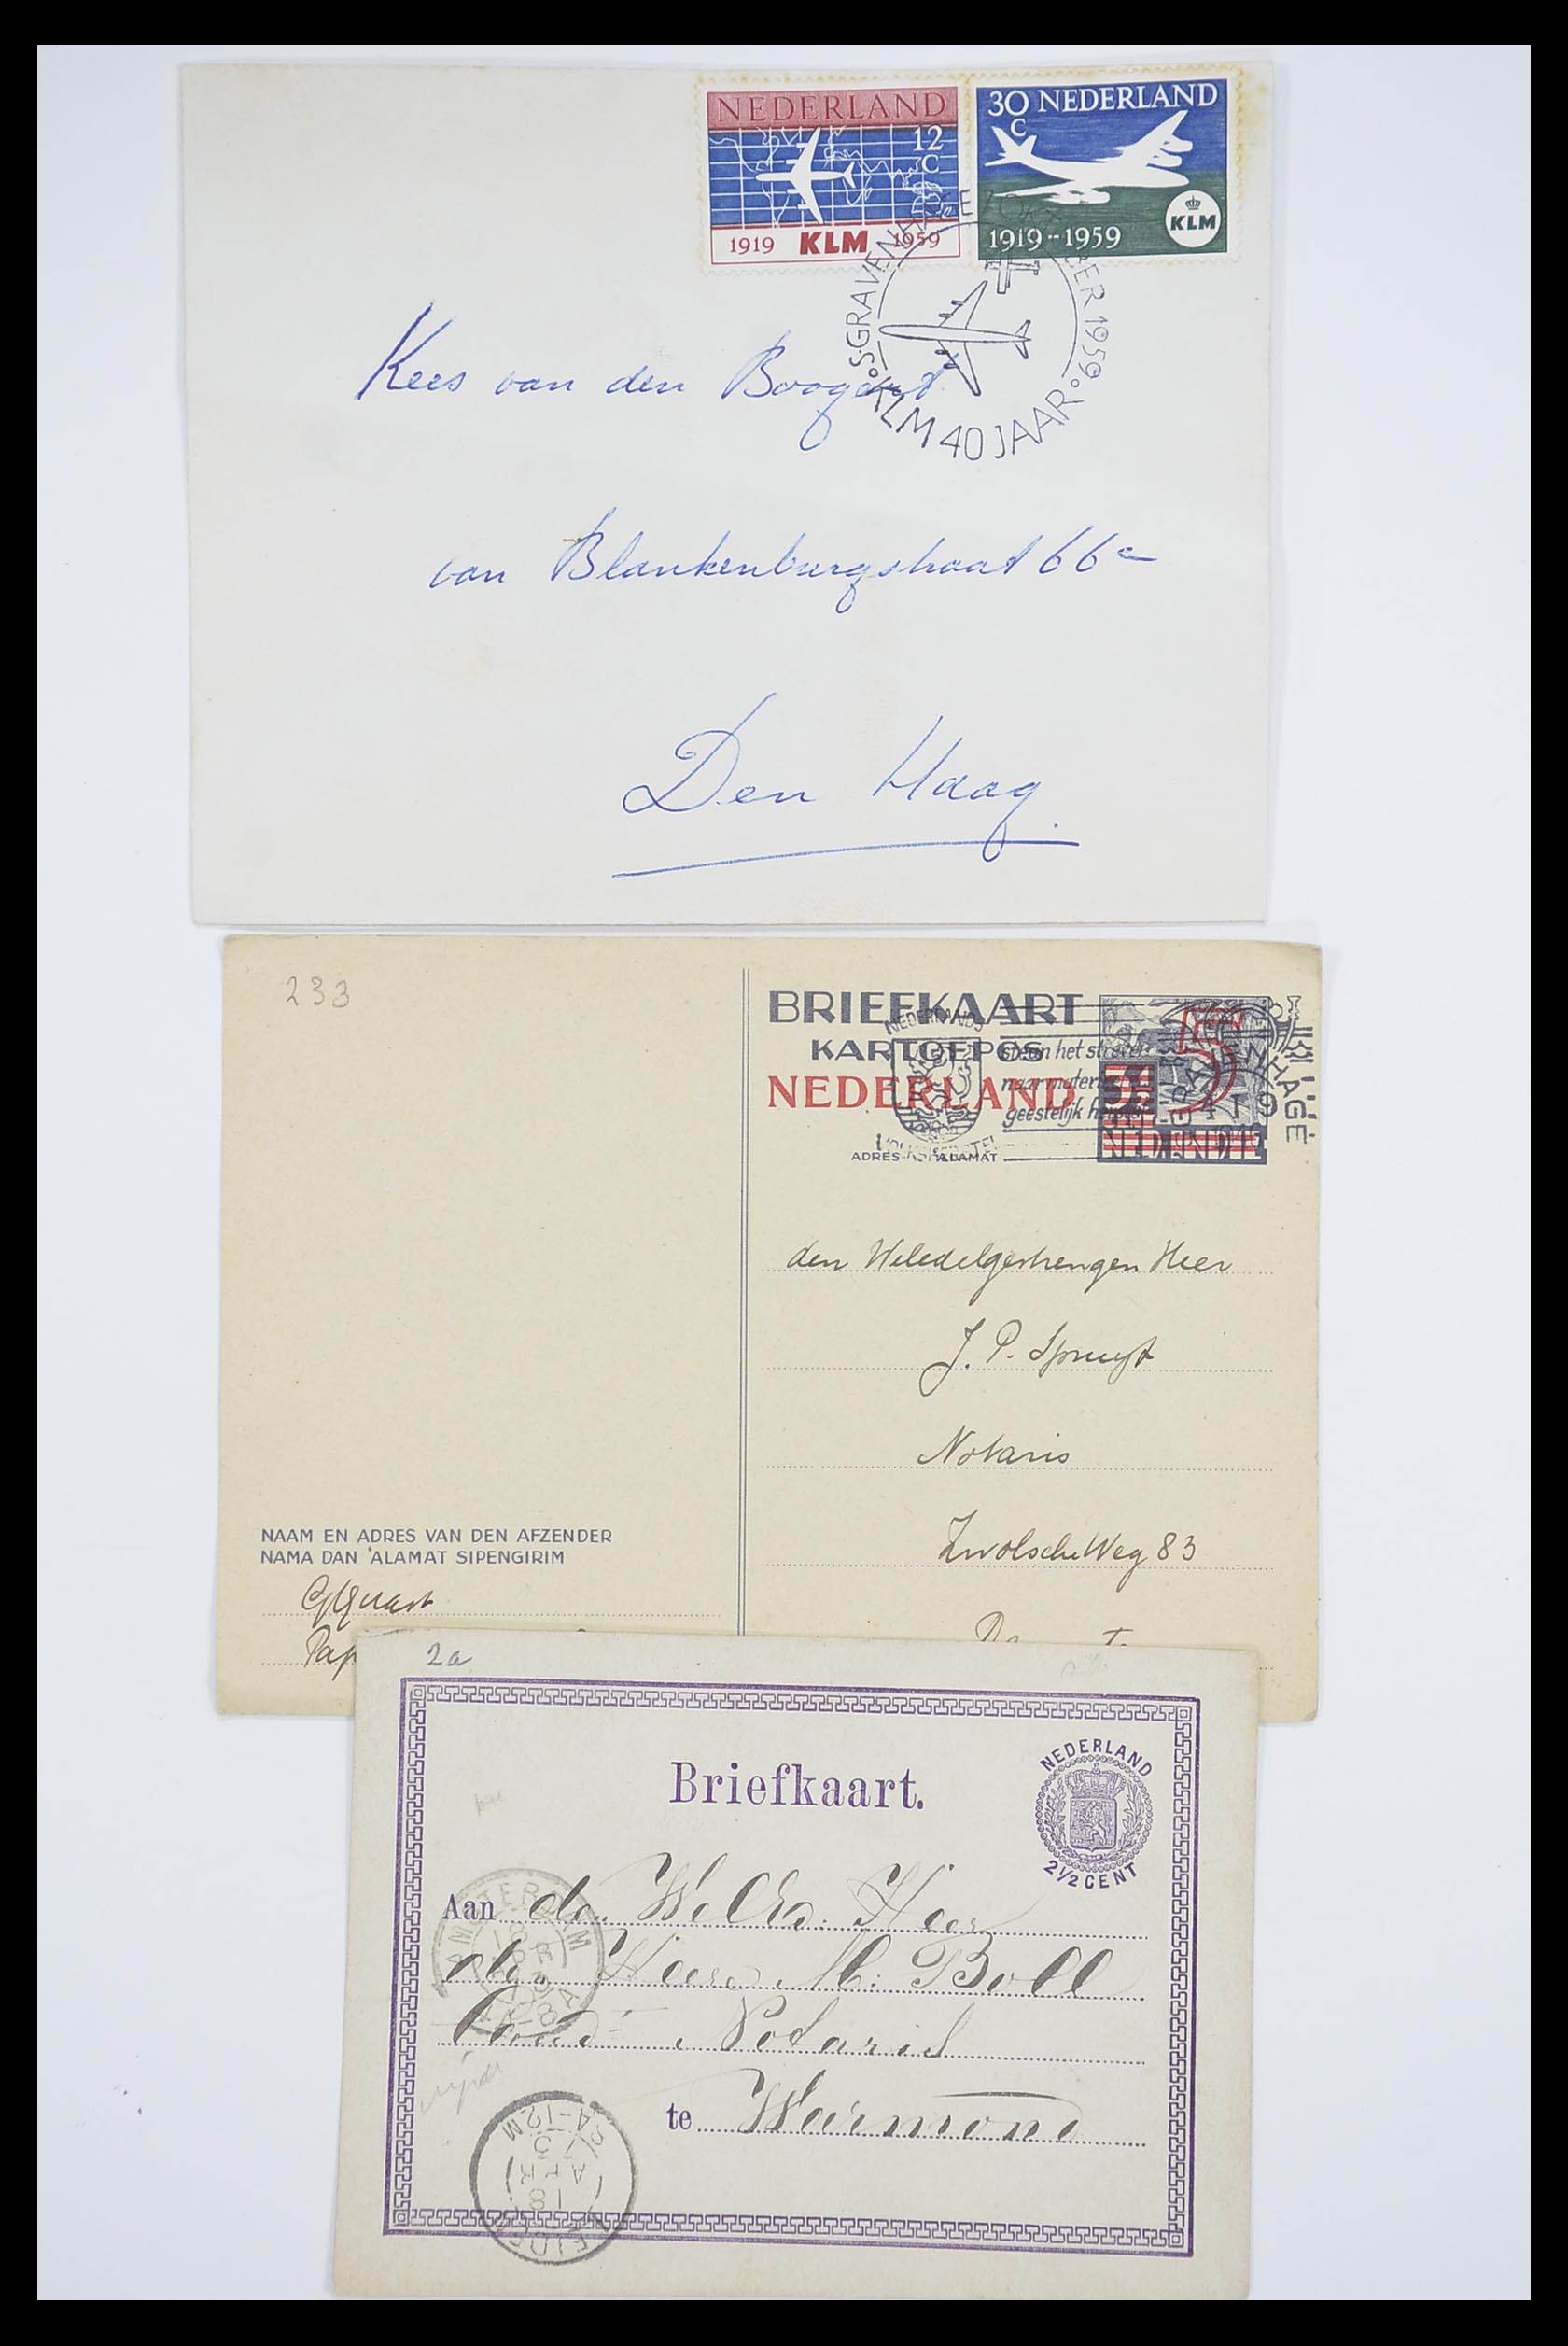 33536 228 - Stamp collection 33536 Netherlands covers 1800-1950.